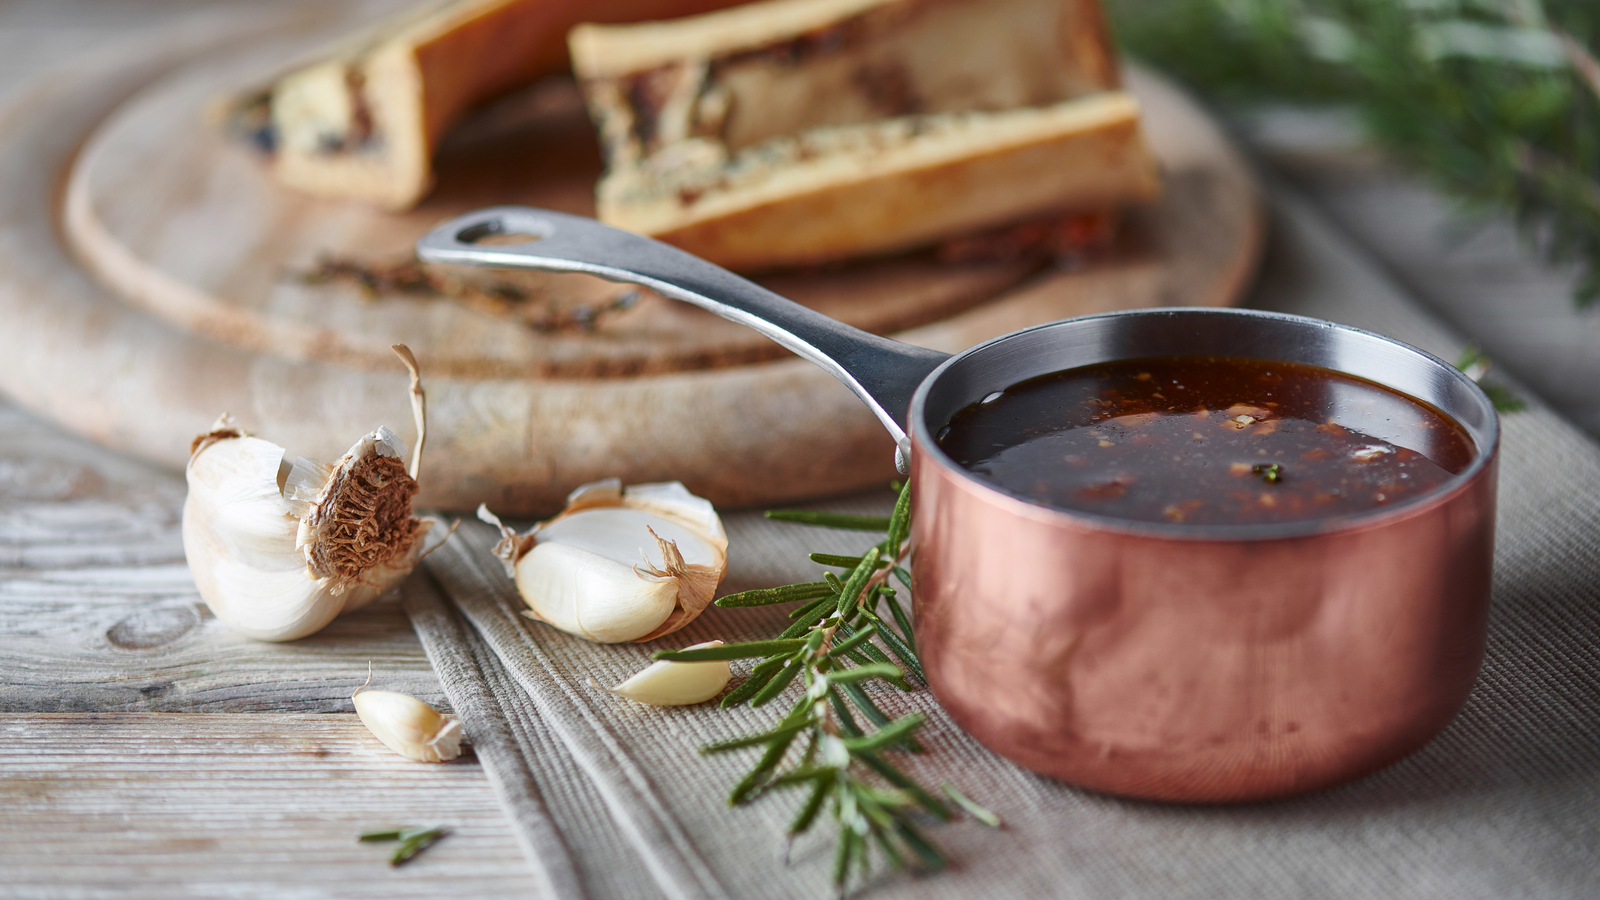 Rich Red Wine & Shallot Sauce. Shop Now!